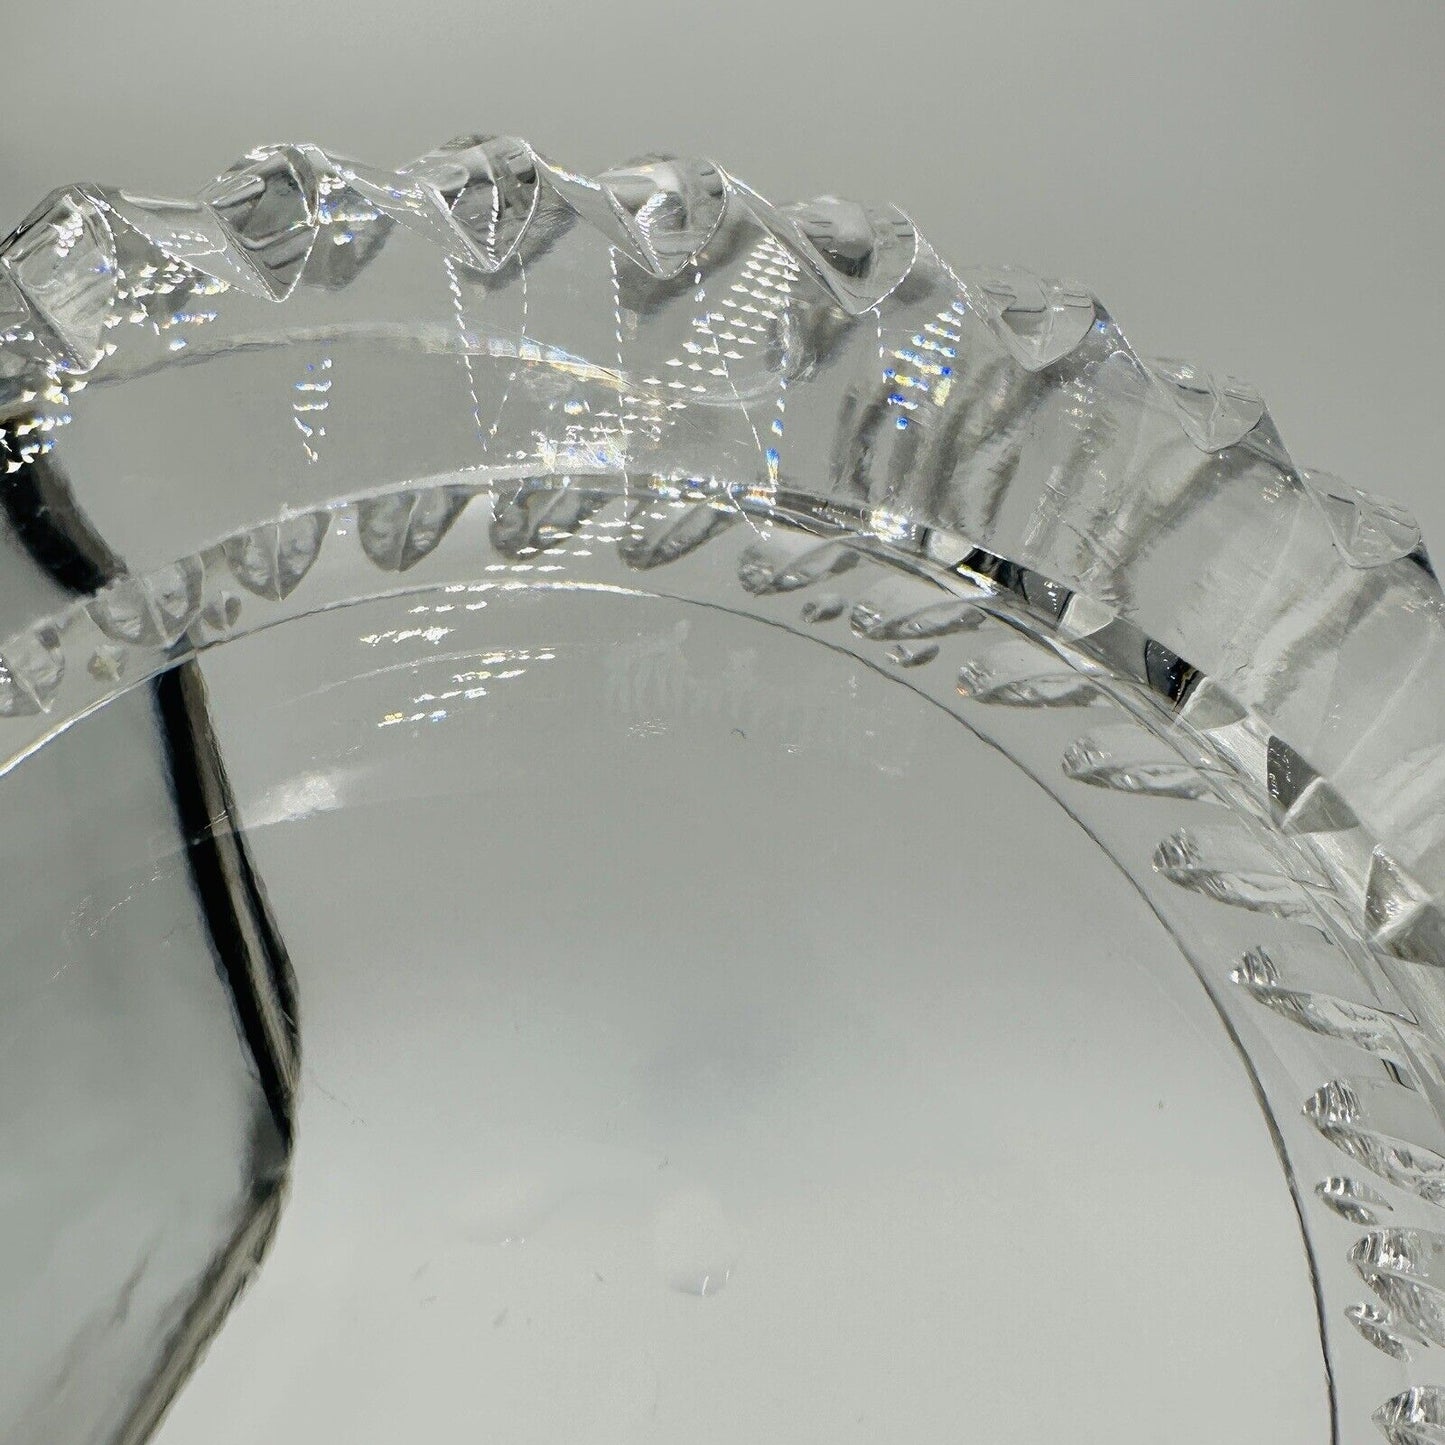 Waterford Serving Bowl Cut Crystal 8" Round Centerpiece Vertical Cuts Decor